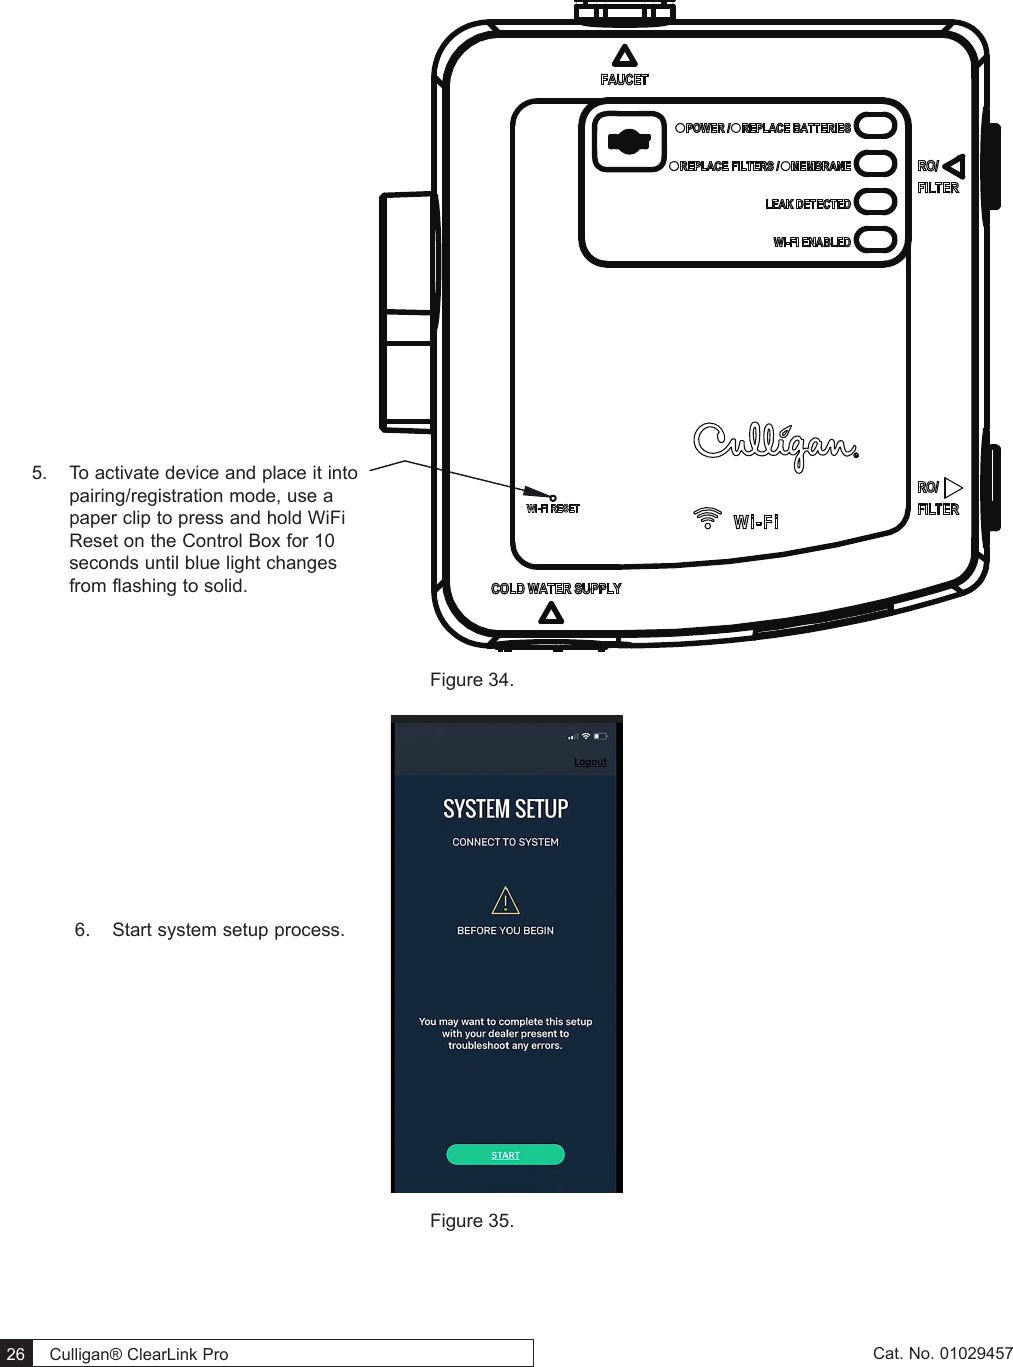  26   Culligan® ClearLink Pro  26  Cat. No. 01029457 Figure 34. Figure 35. 5.  To activate device and place it into pairing/registration mode, use a paper clip to press and hold WiFi Reset on the Control Box for 10 seconds until blue light changes from flashing to solid.6.  Start system setup process.